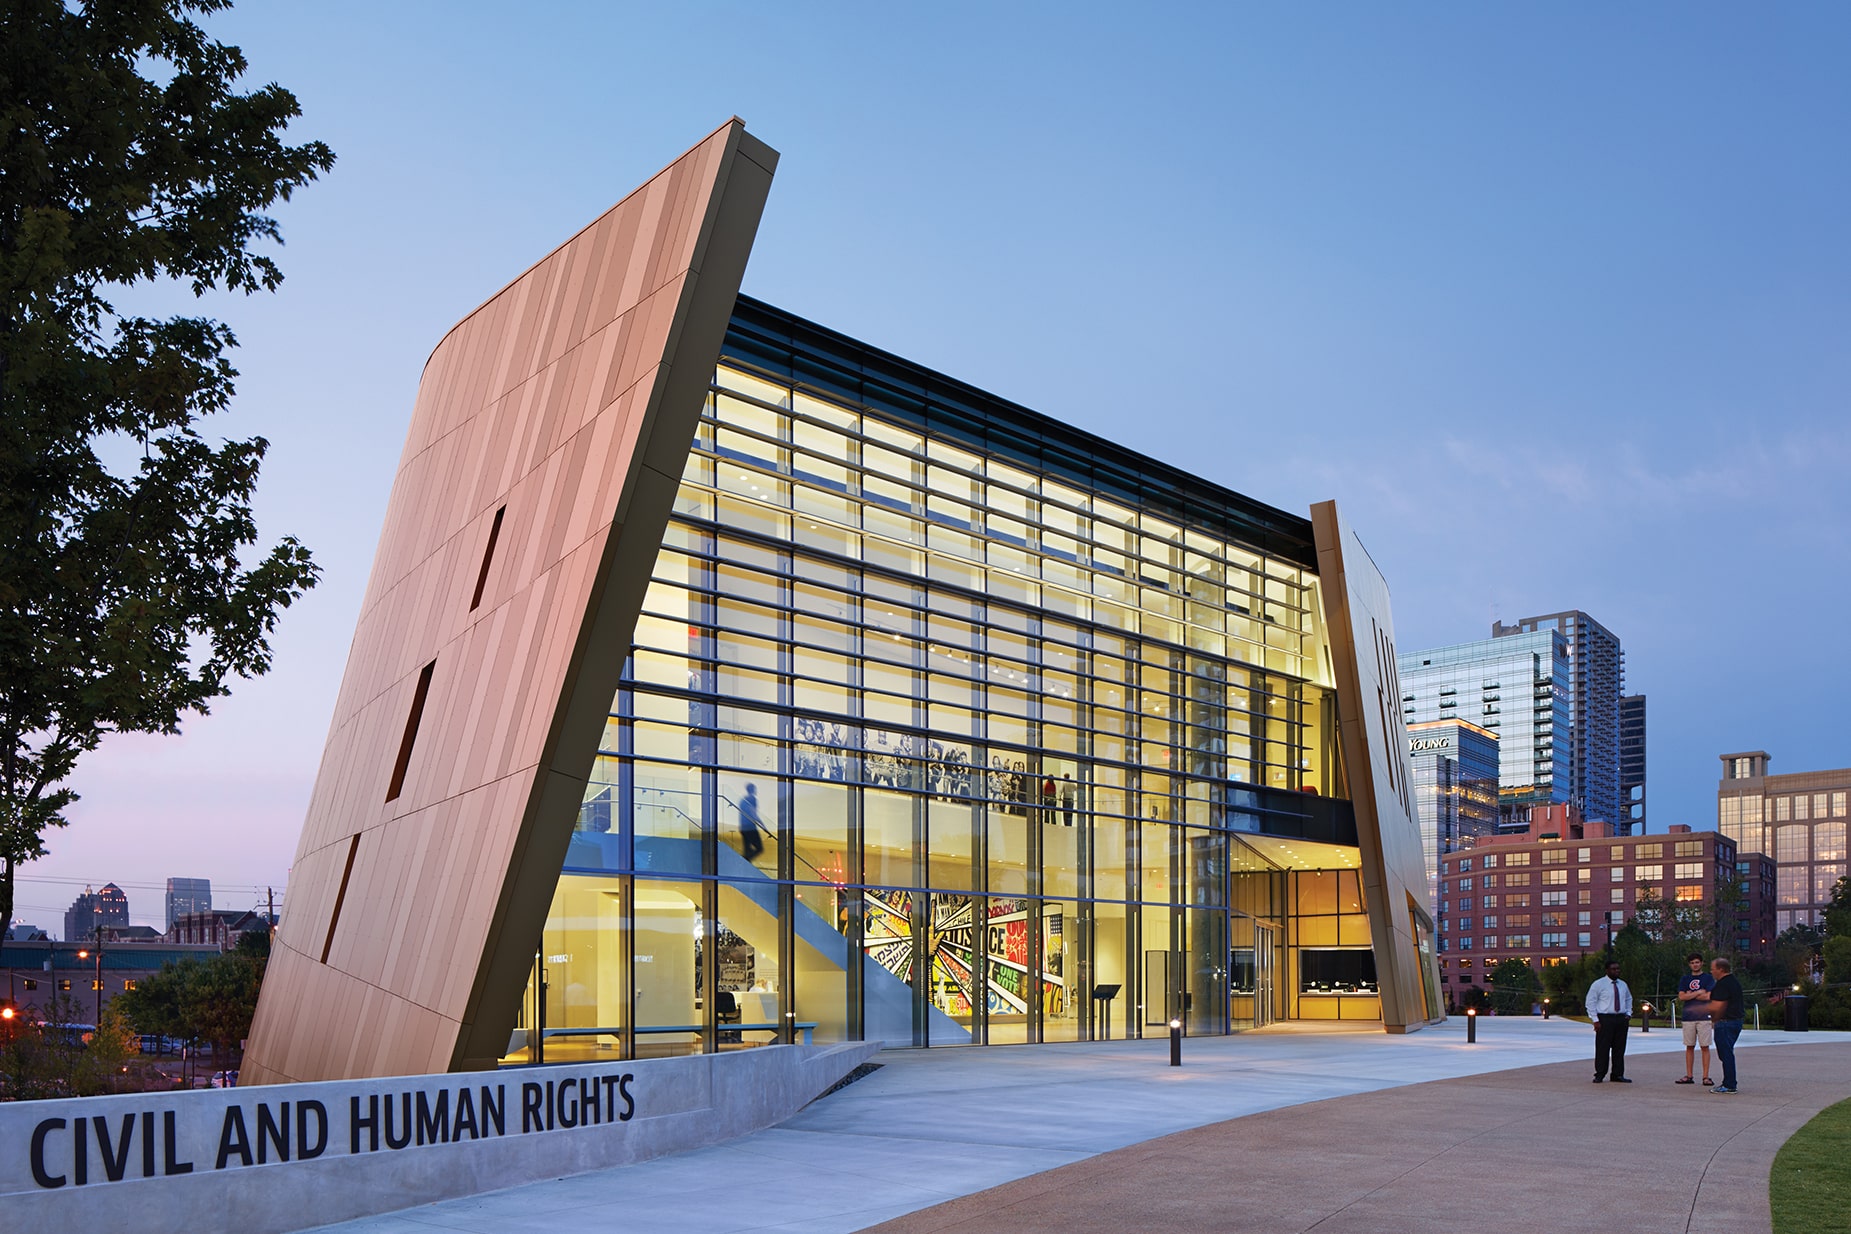 Center for Civil and Human Rights